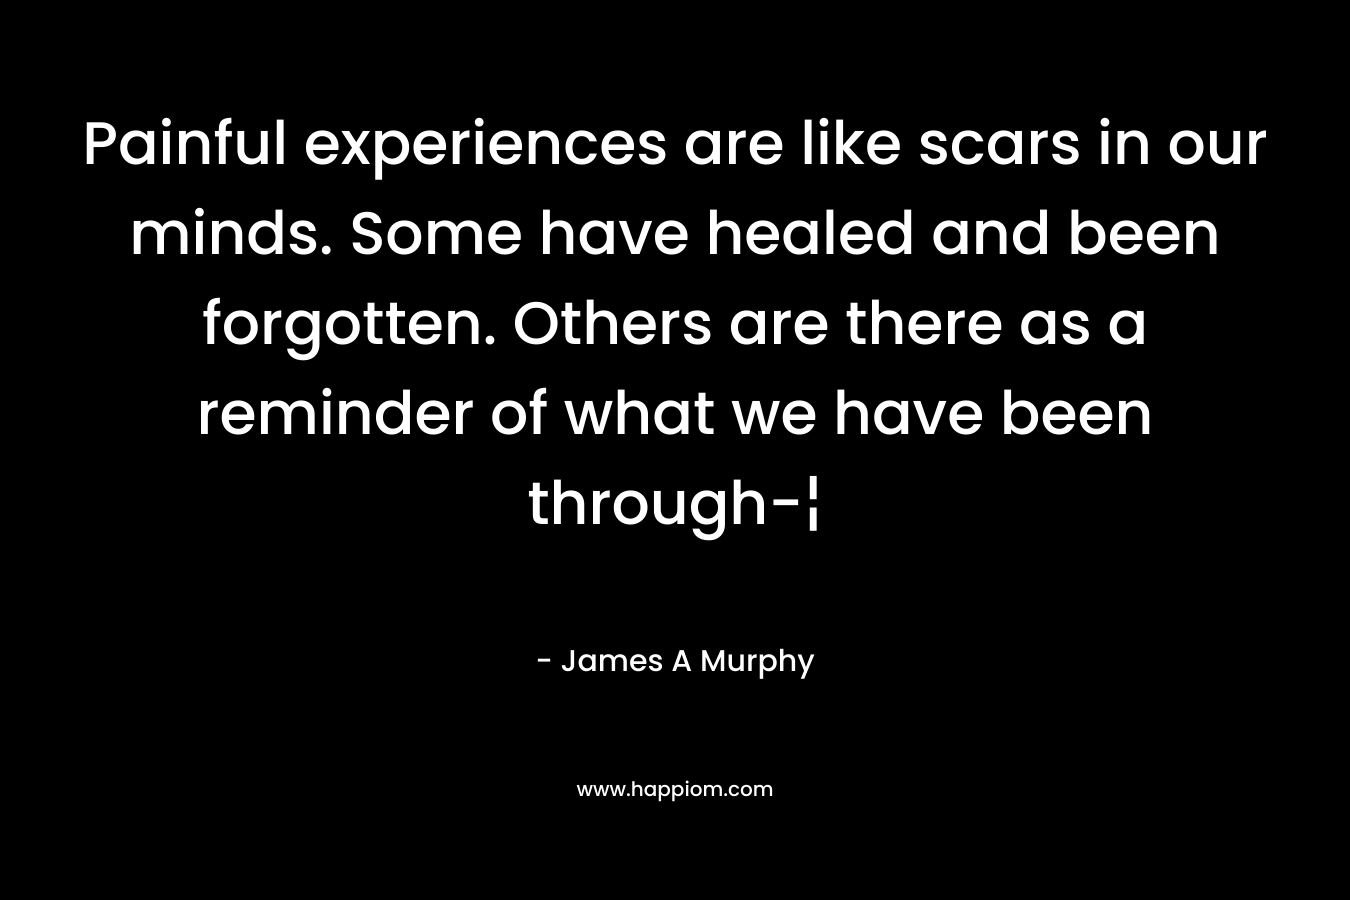 Painful experiences are like scars in our minds. Some have healed and been forgotten. Others are there as a reminder of what we have been through-¦